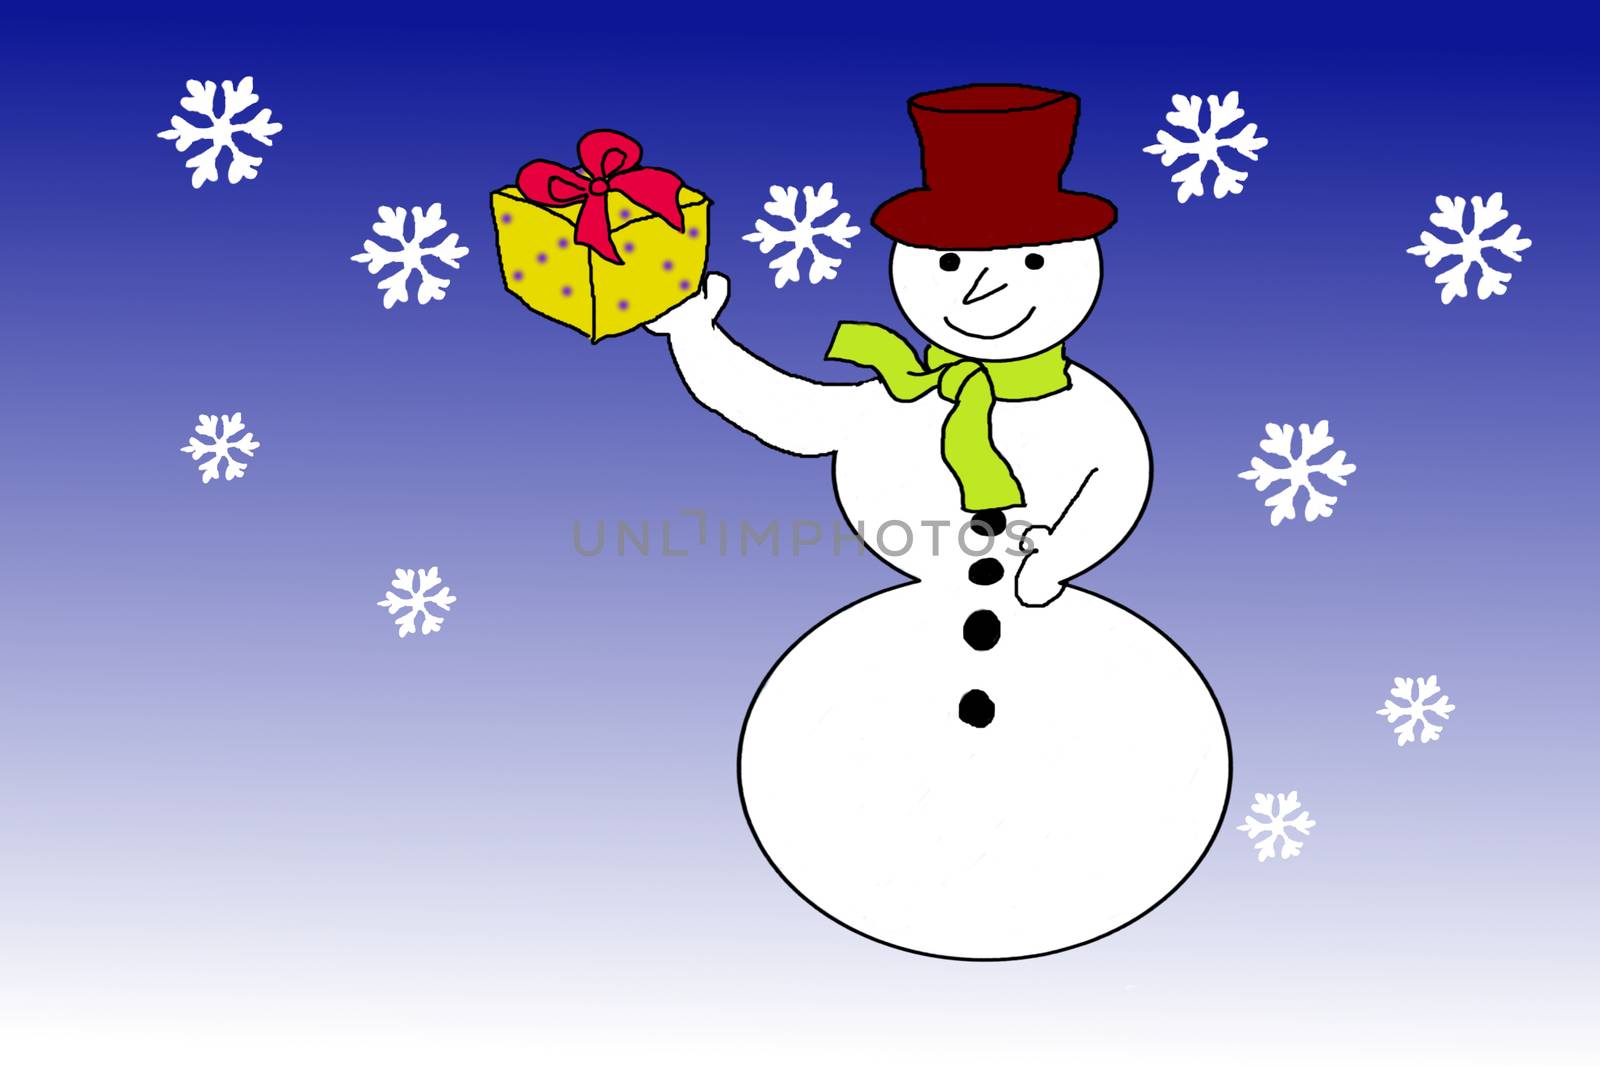 Snowman with Christmas gift